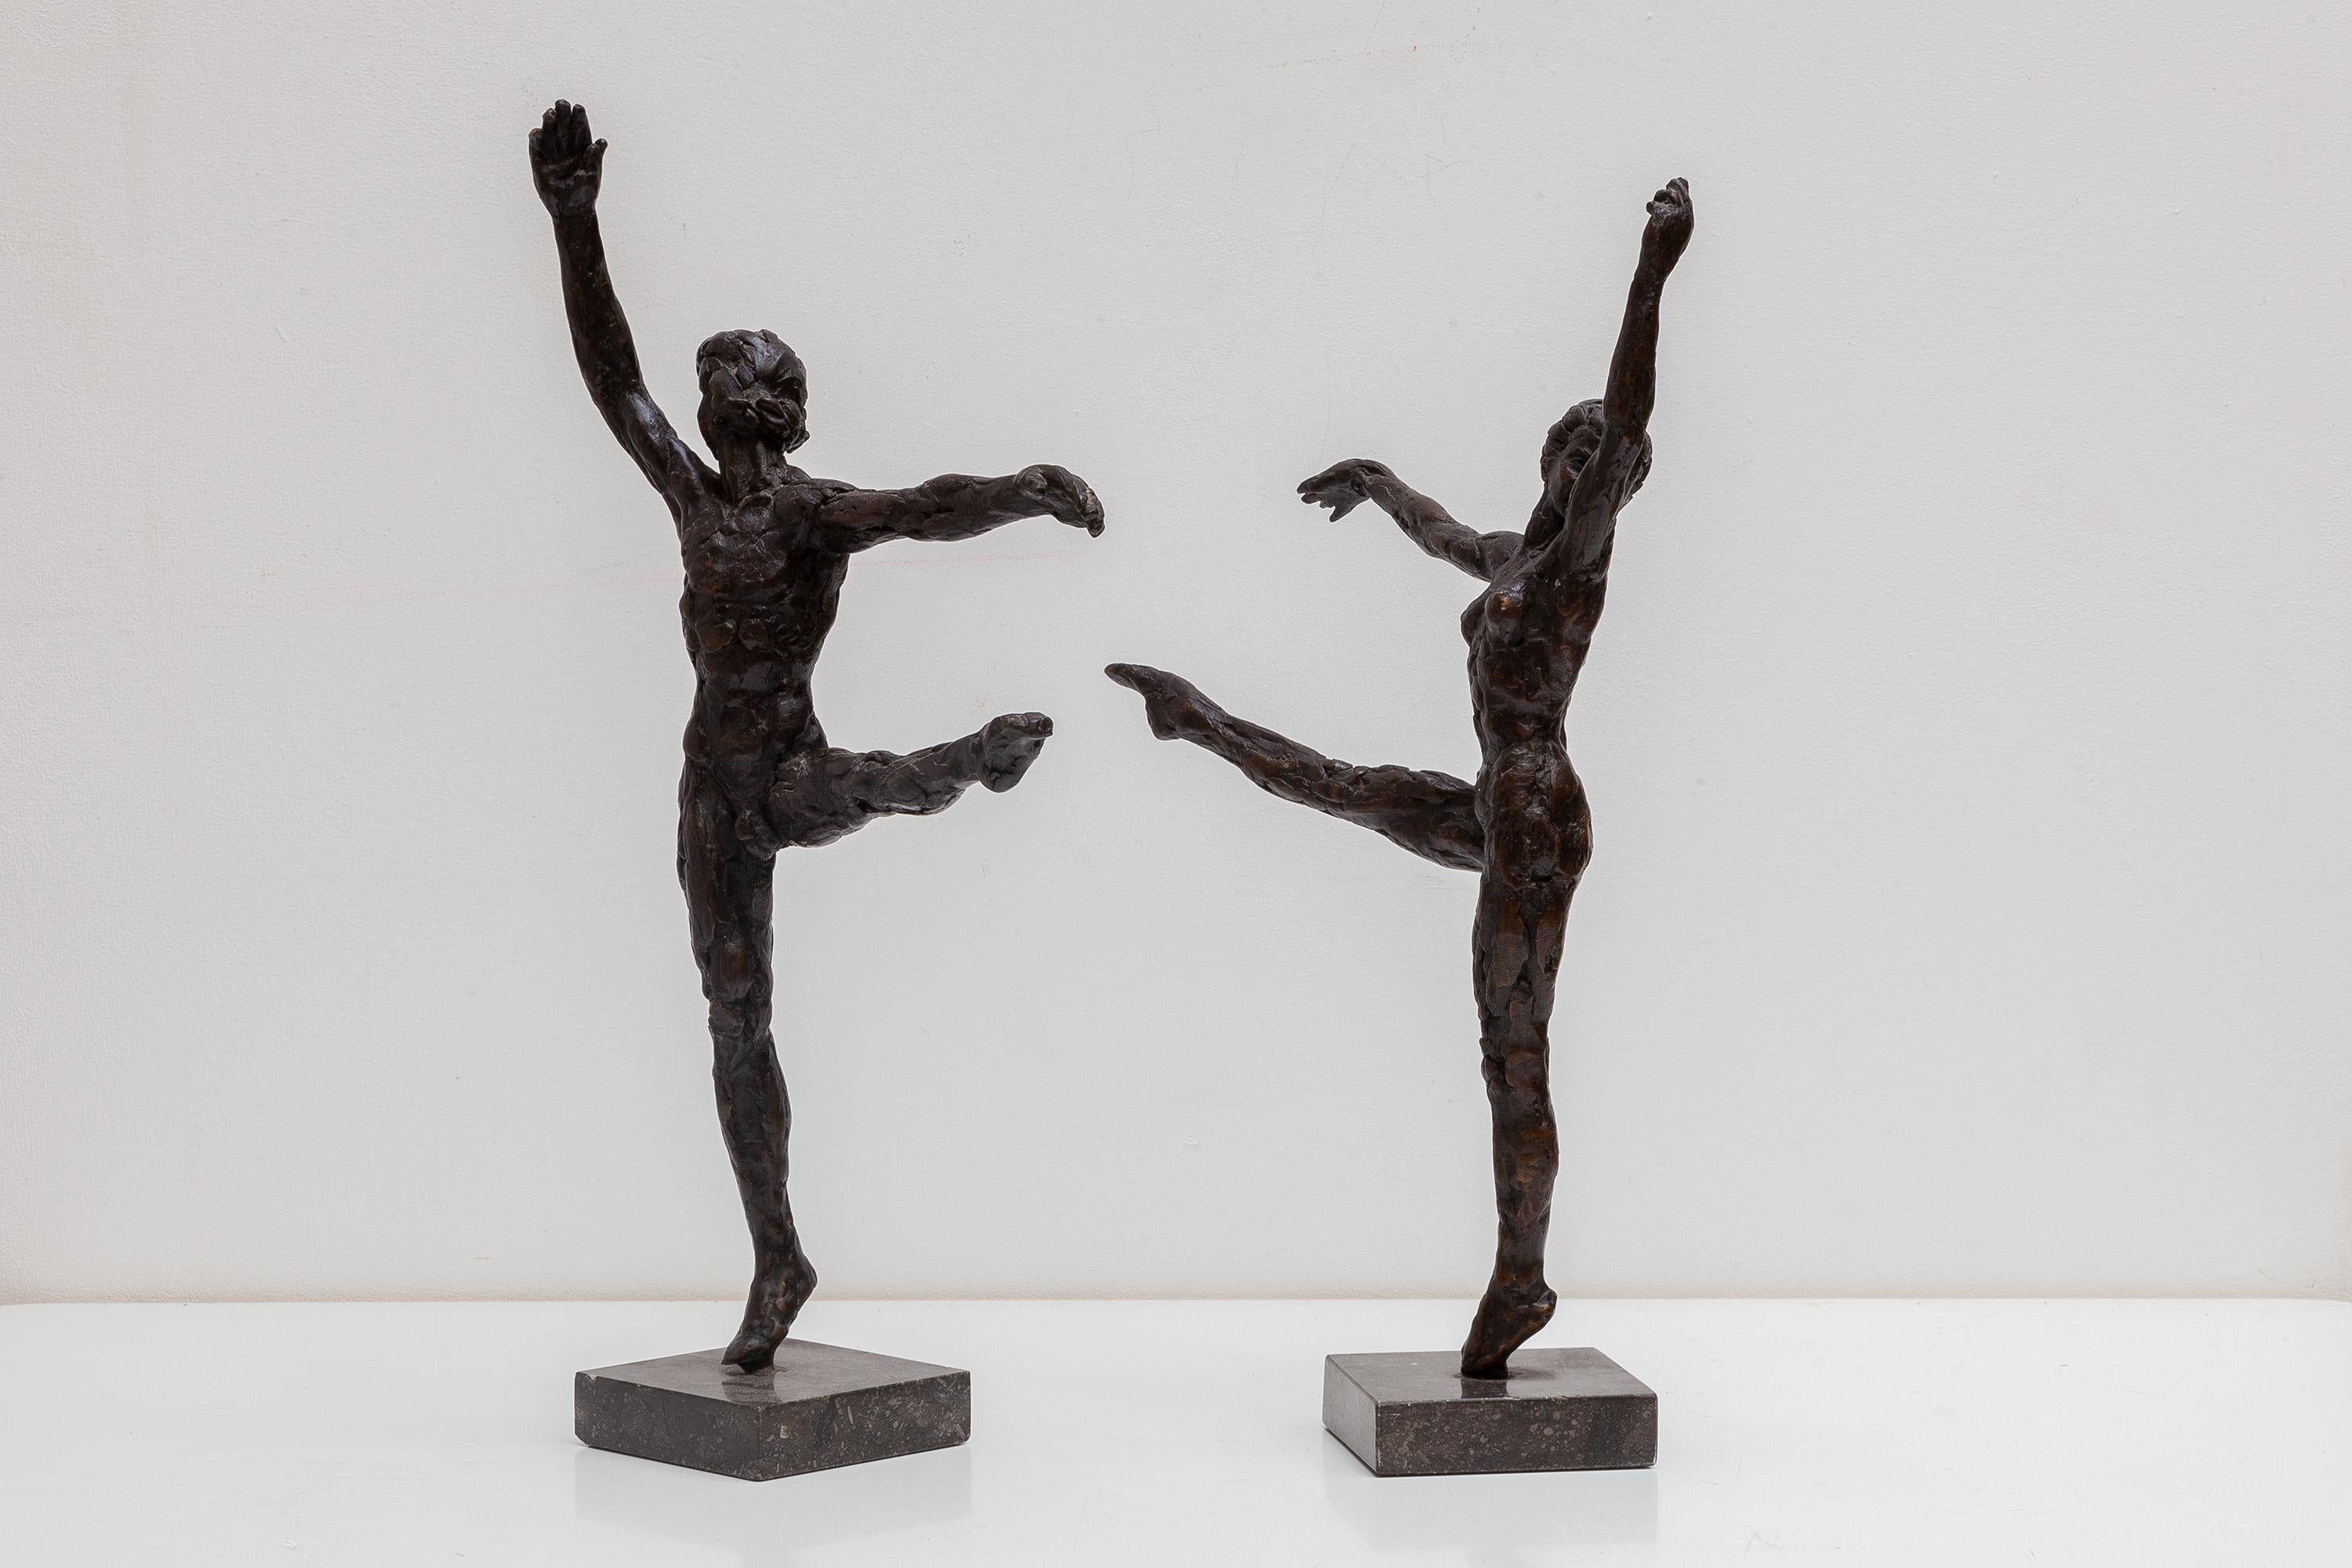 Beautiful set of two expressive dancers from the seventies, handcrafted in bronze, inspired by sculpted clay sculptures a technique that is characteristic of the seventies and gives the dancers a special power of nature.
The dancers are signed by